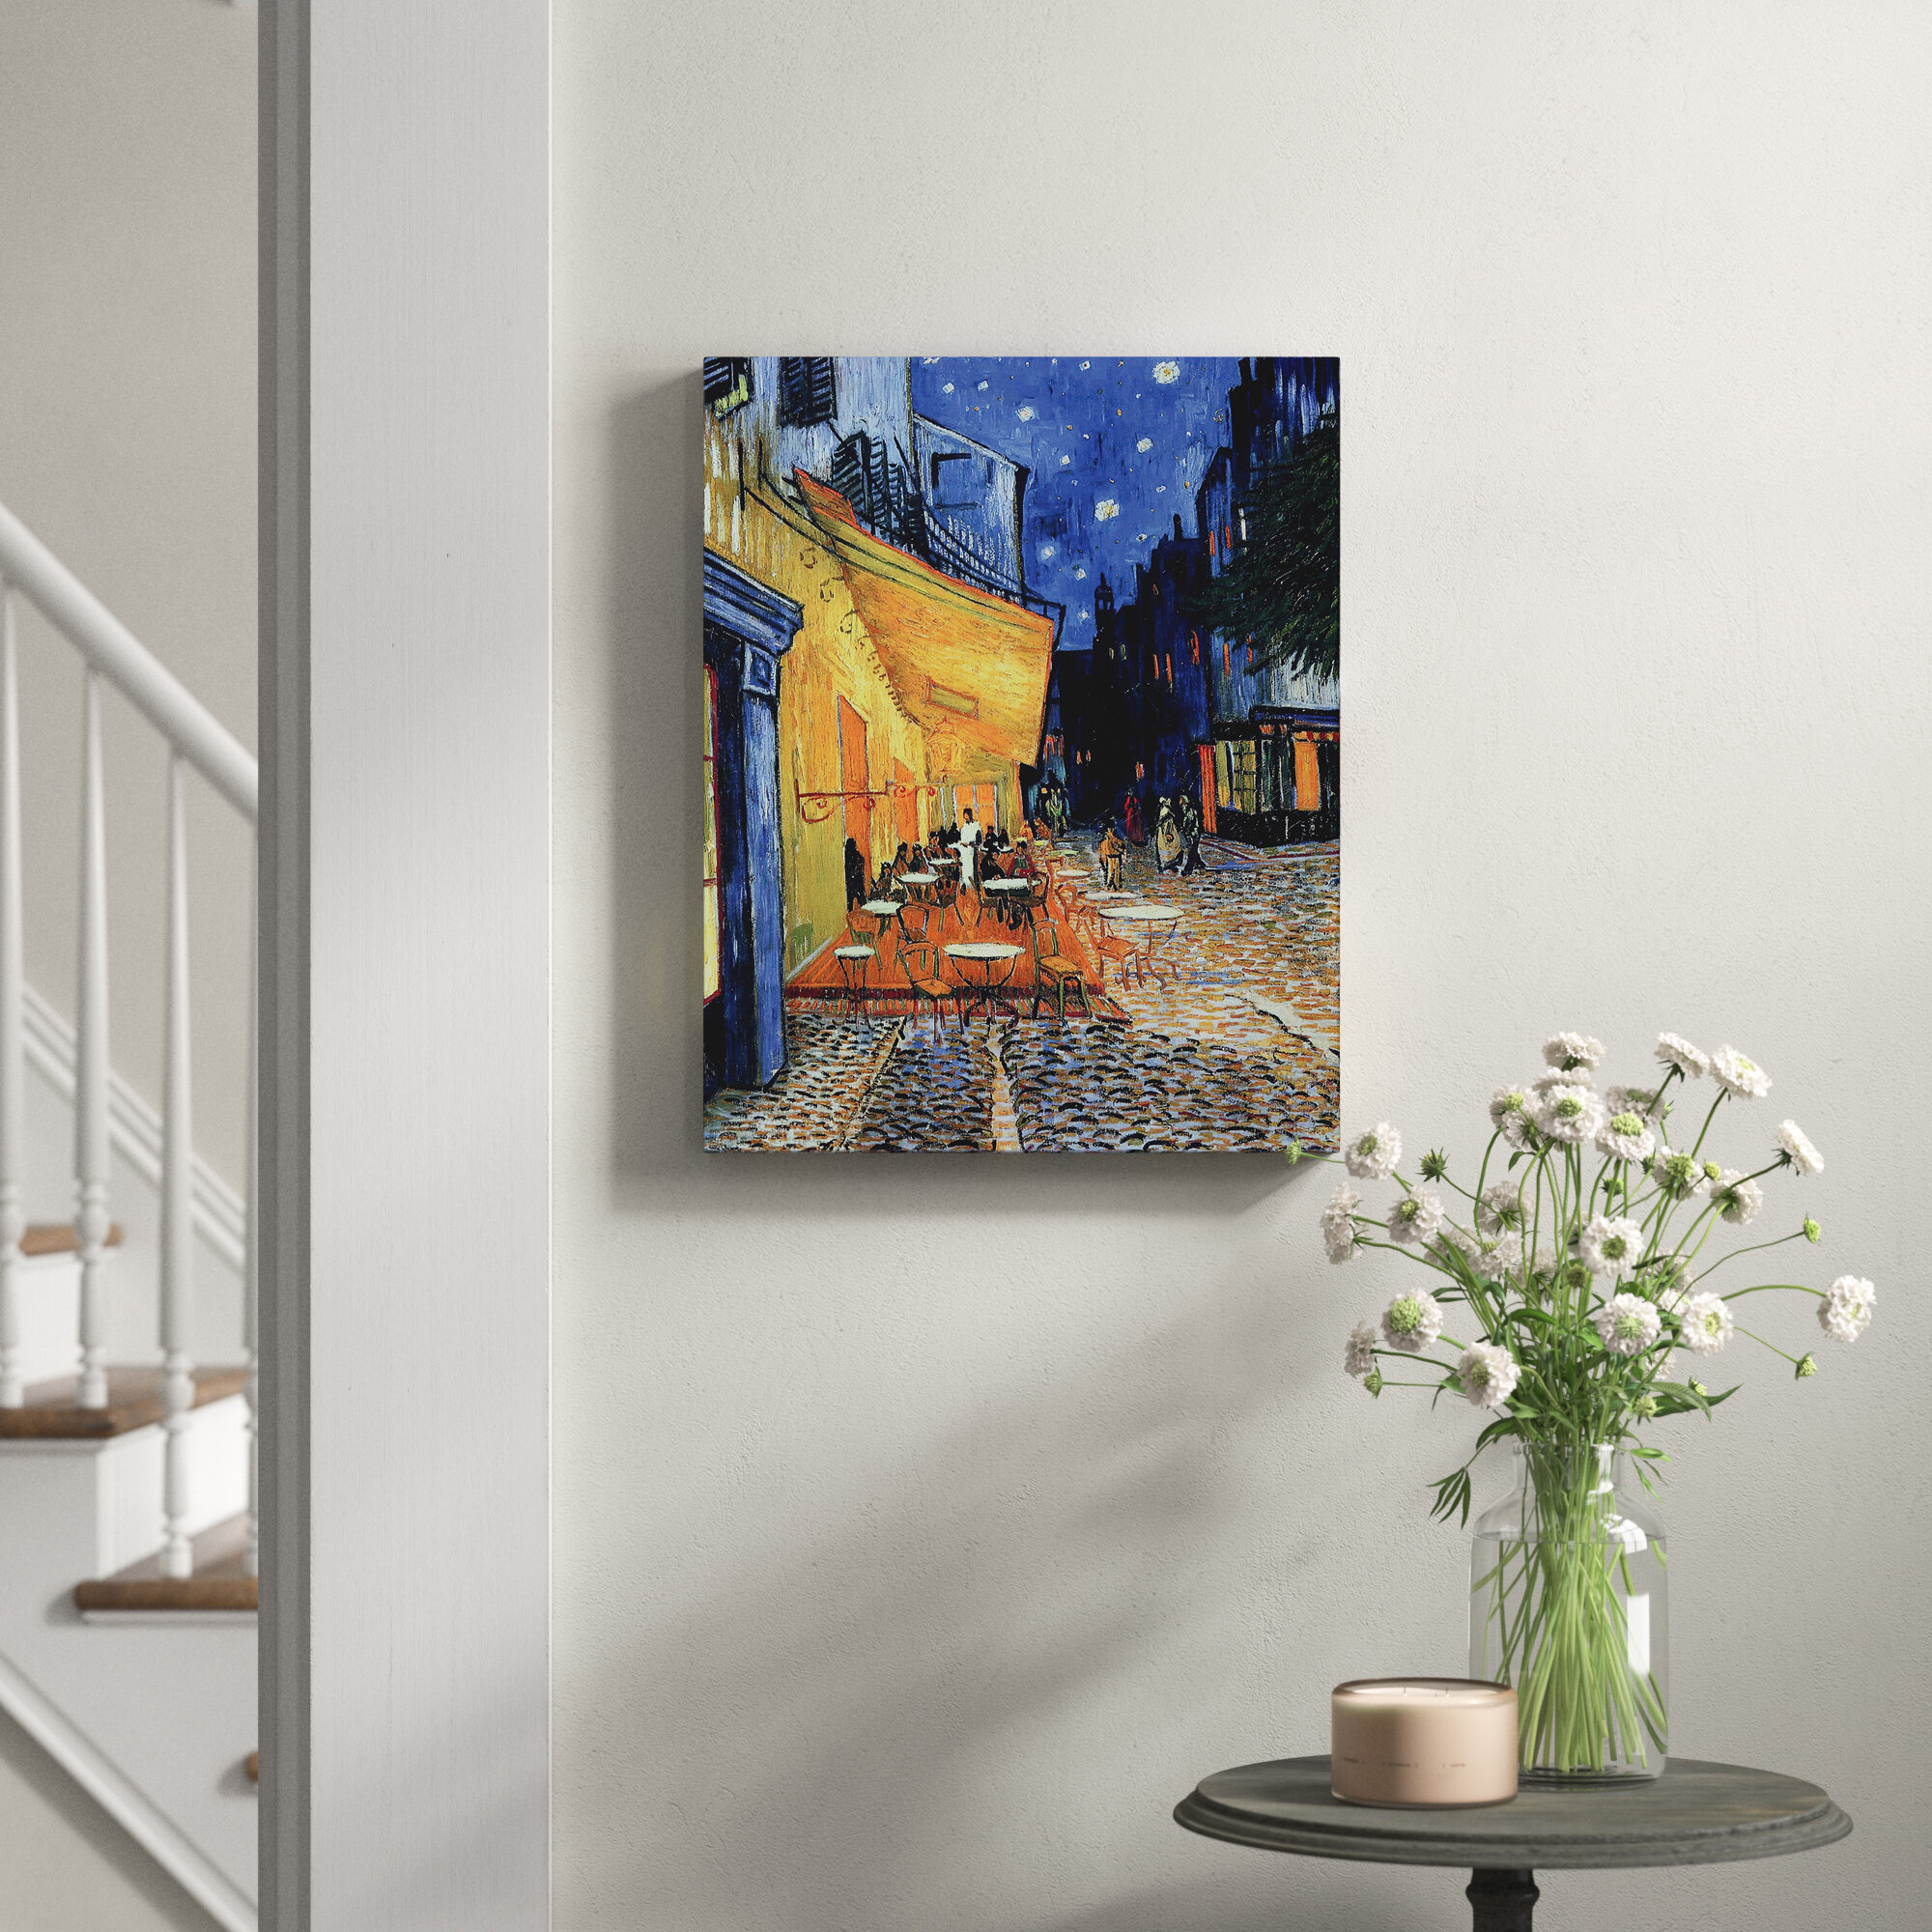 Canvas Wall Art Van Gogh Painting Print Repro Picture Home Room Decor Flowers 